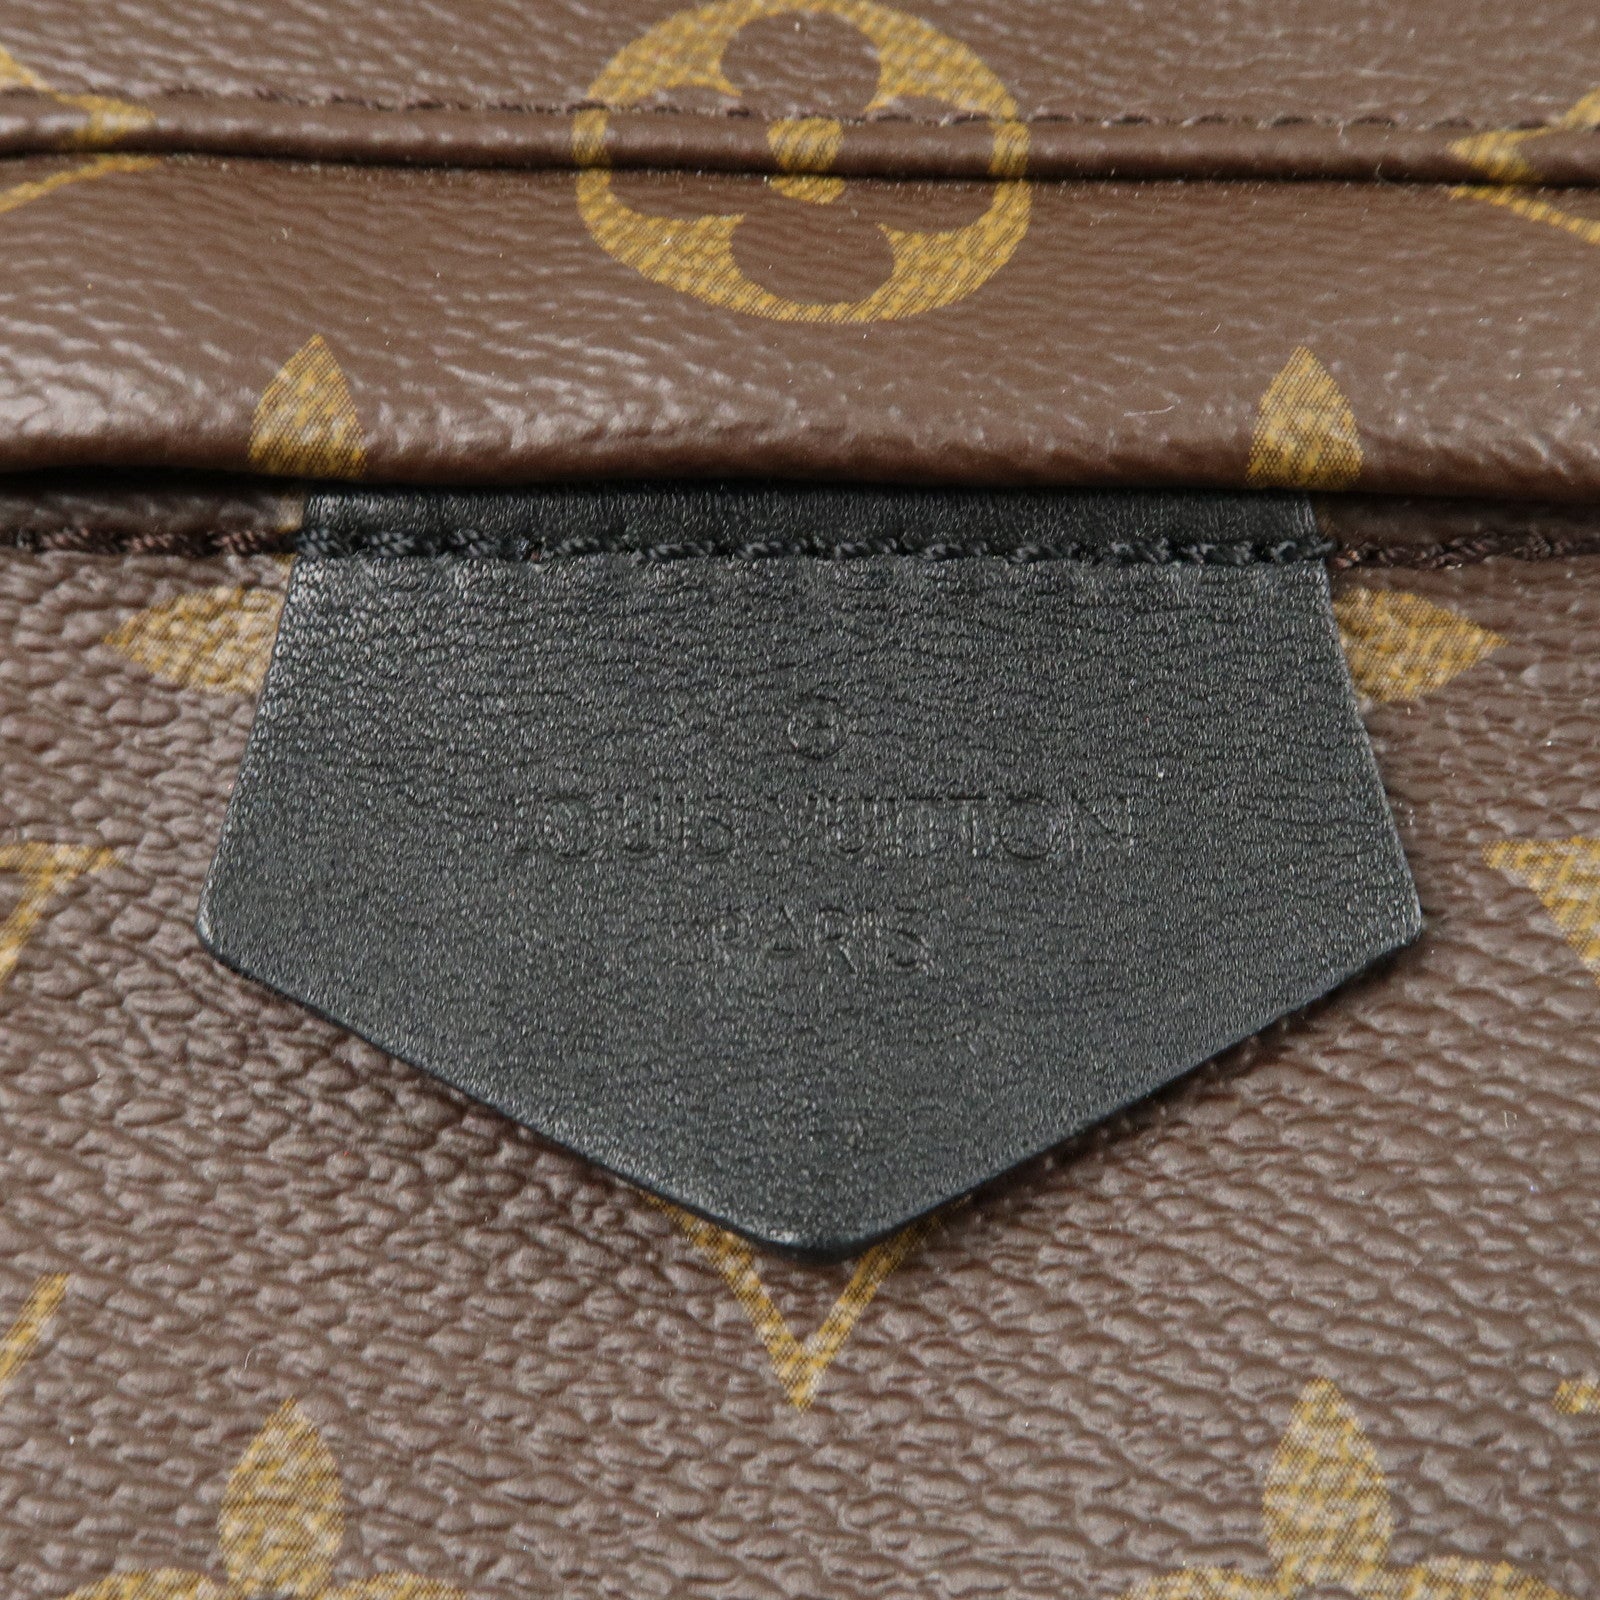 Louis-Vuitton-Monogram-Palm-Springs-MM-Back-Pack-M41561 – dct-ep_vintage  luxury Store